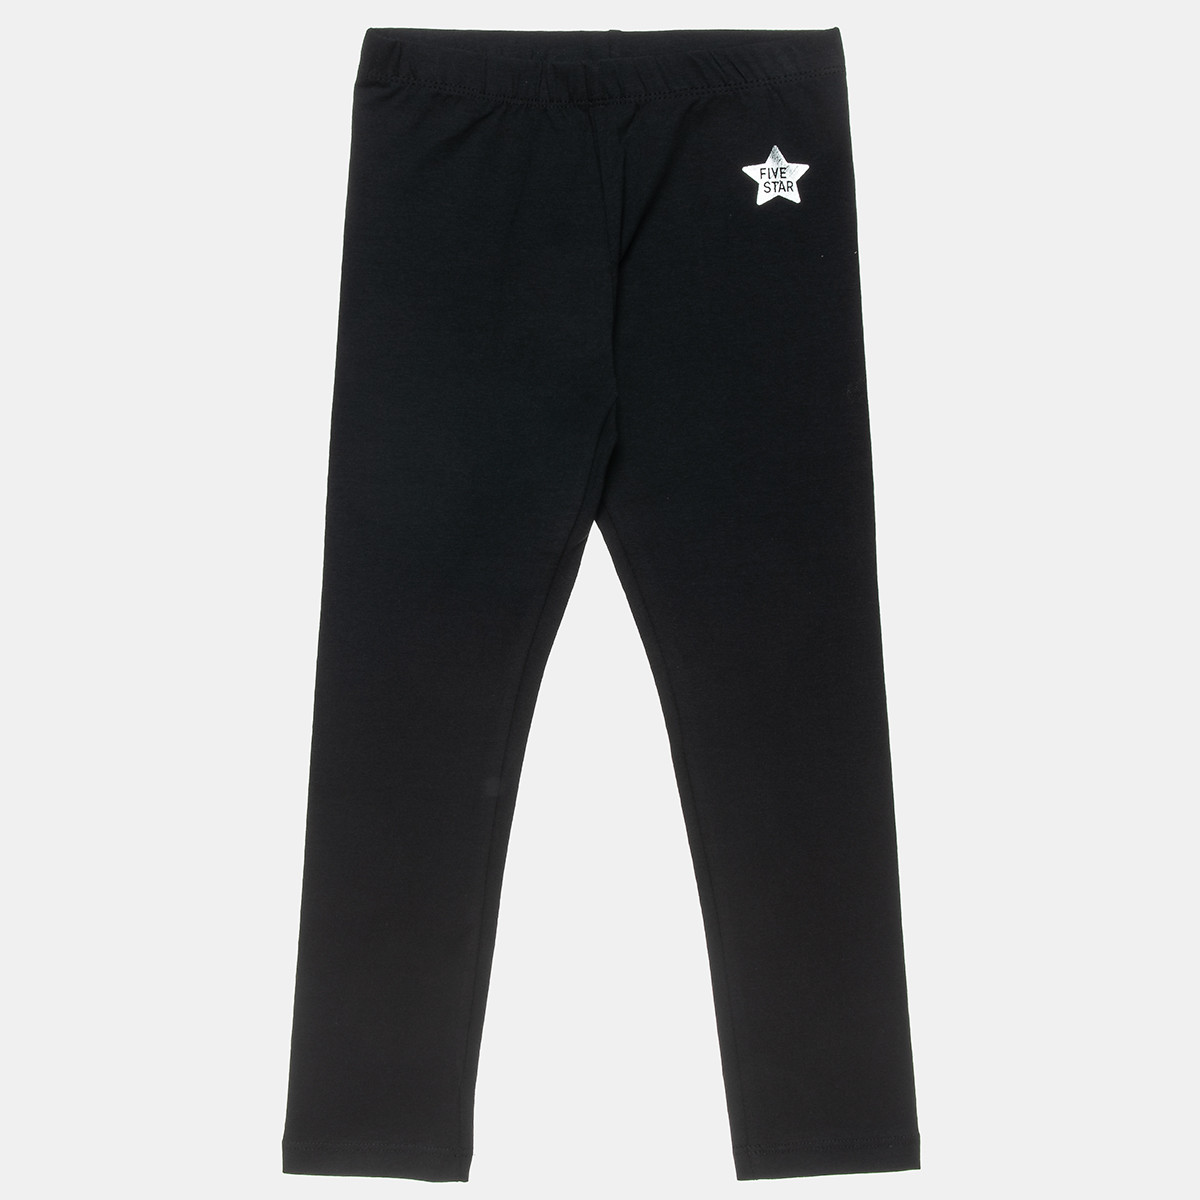 Leggings Five Star light touch (12 months-5 years) - Alouette